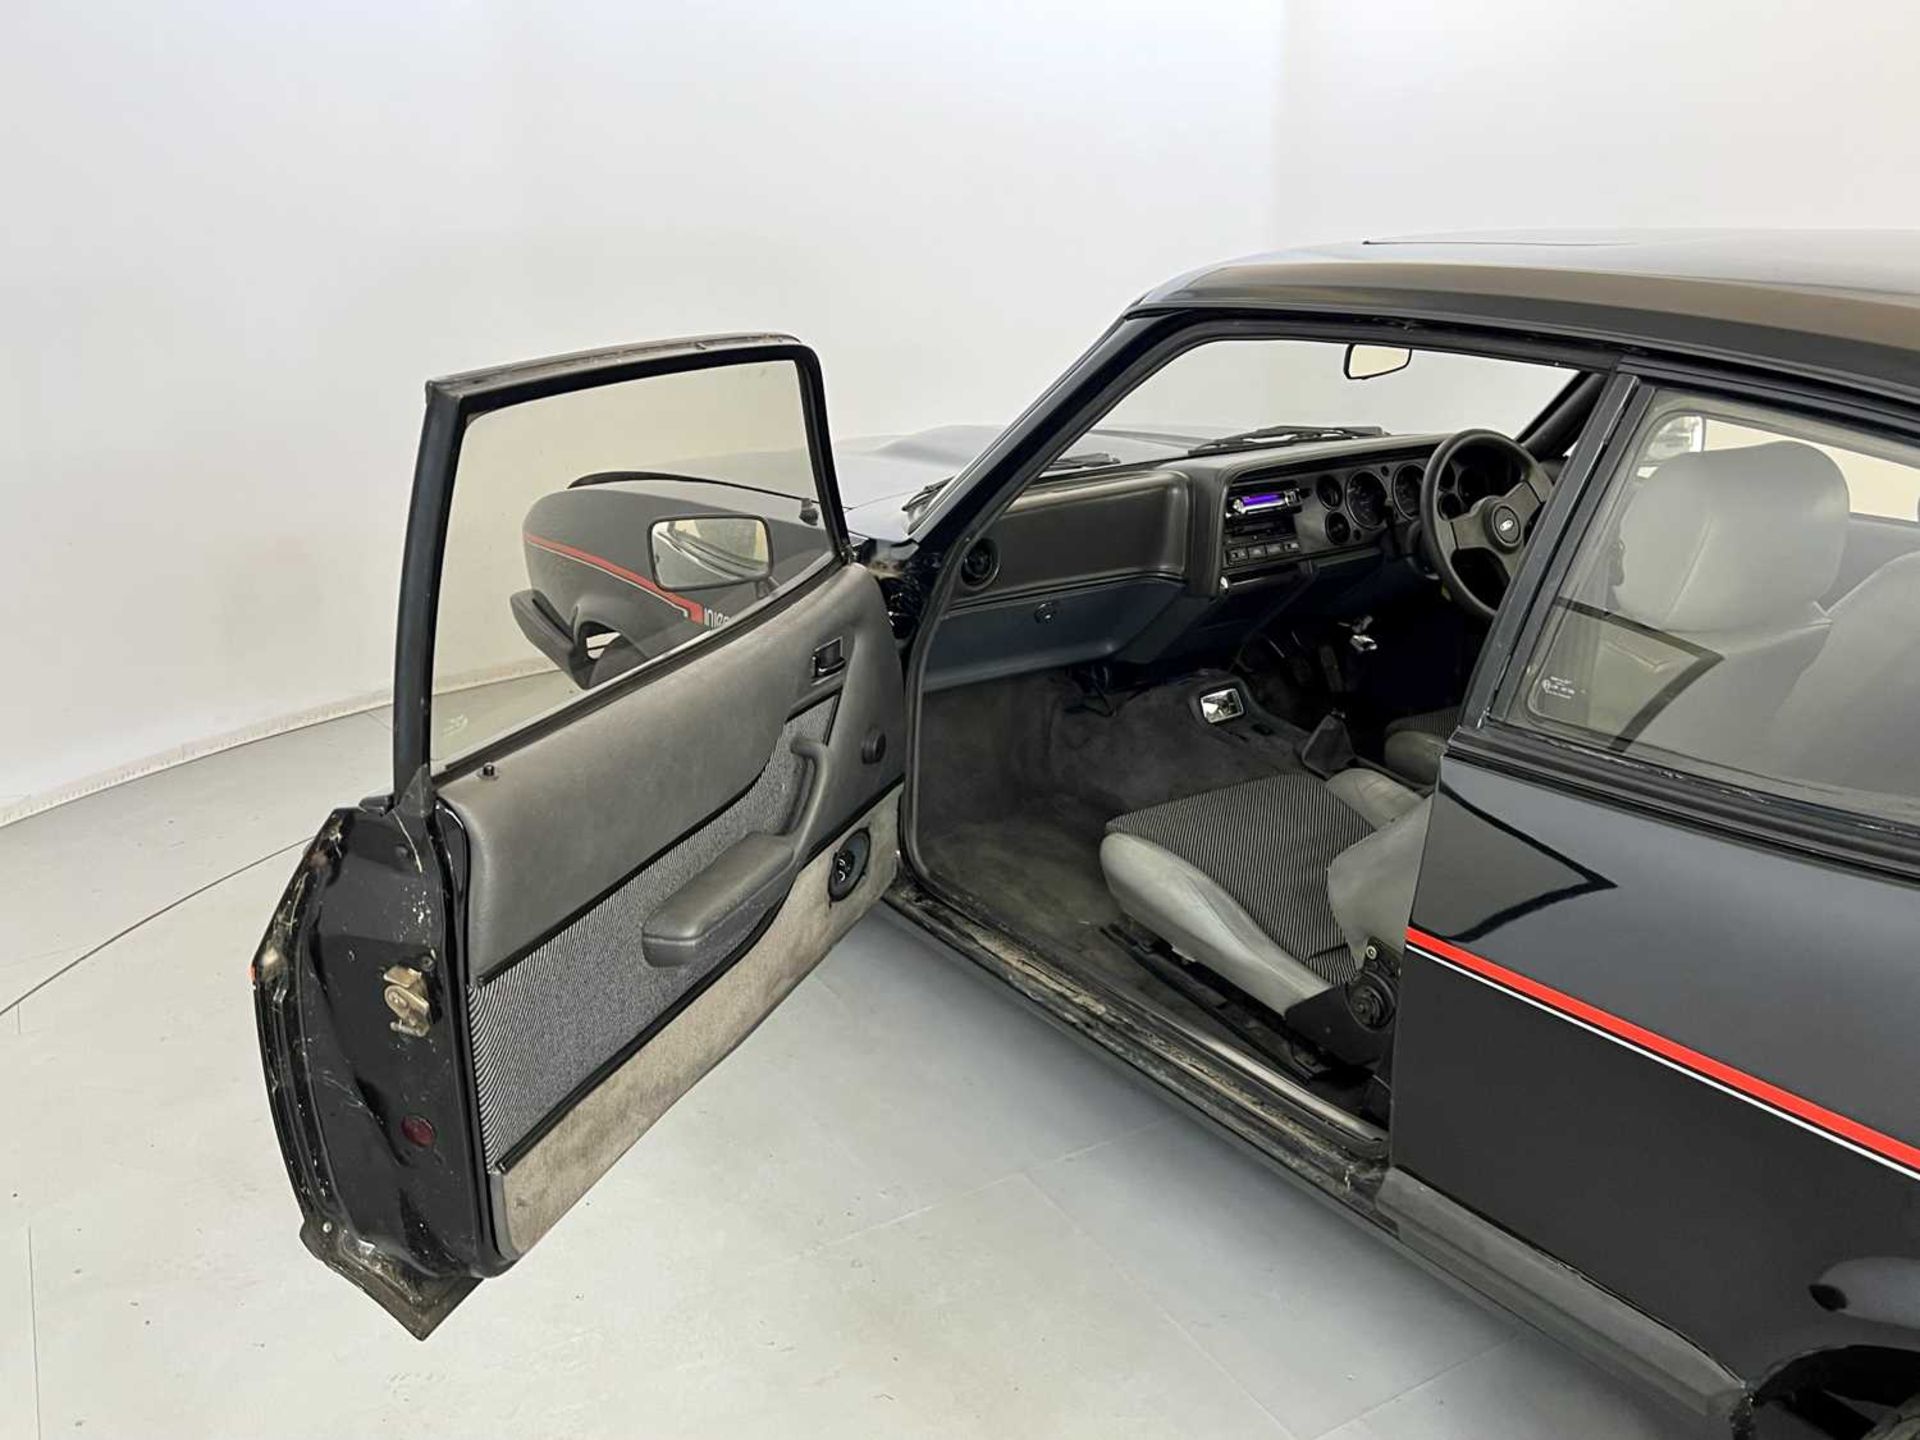 1987 Ford Capri 2.8 Injection - Image 21 of 28